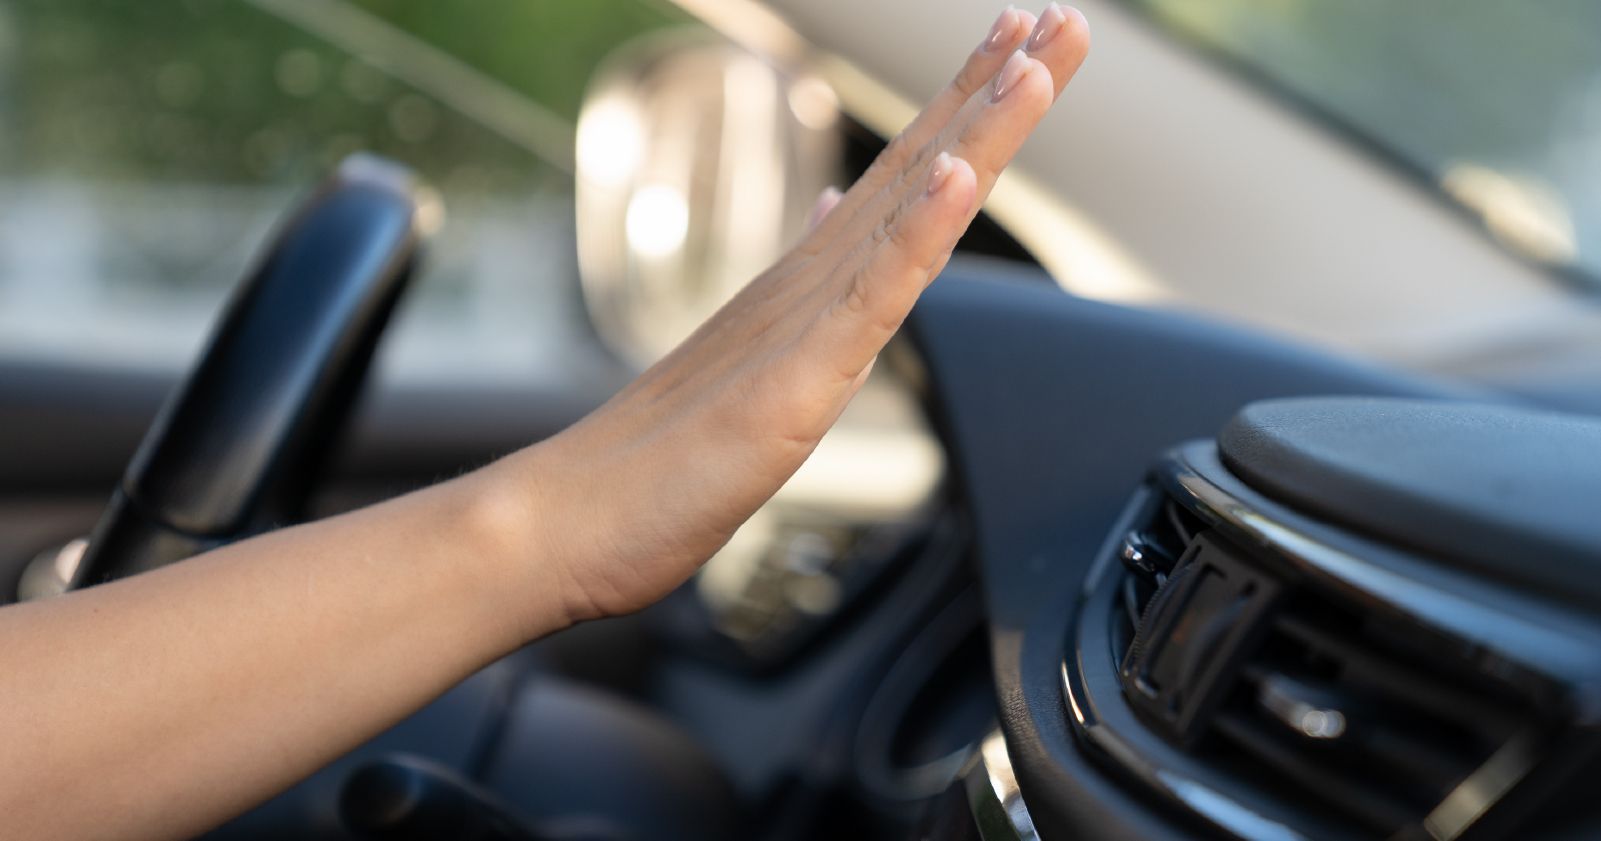 Stay Cool: Preparing Your Car's Air Conditioning for Warm Weather